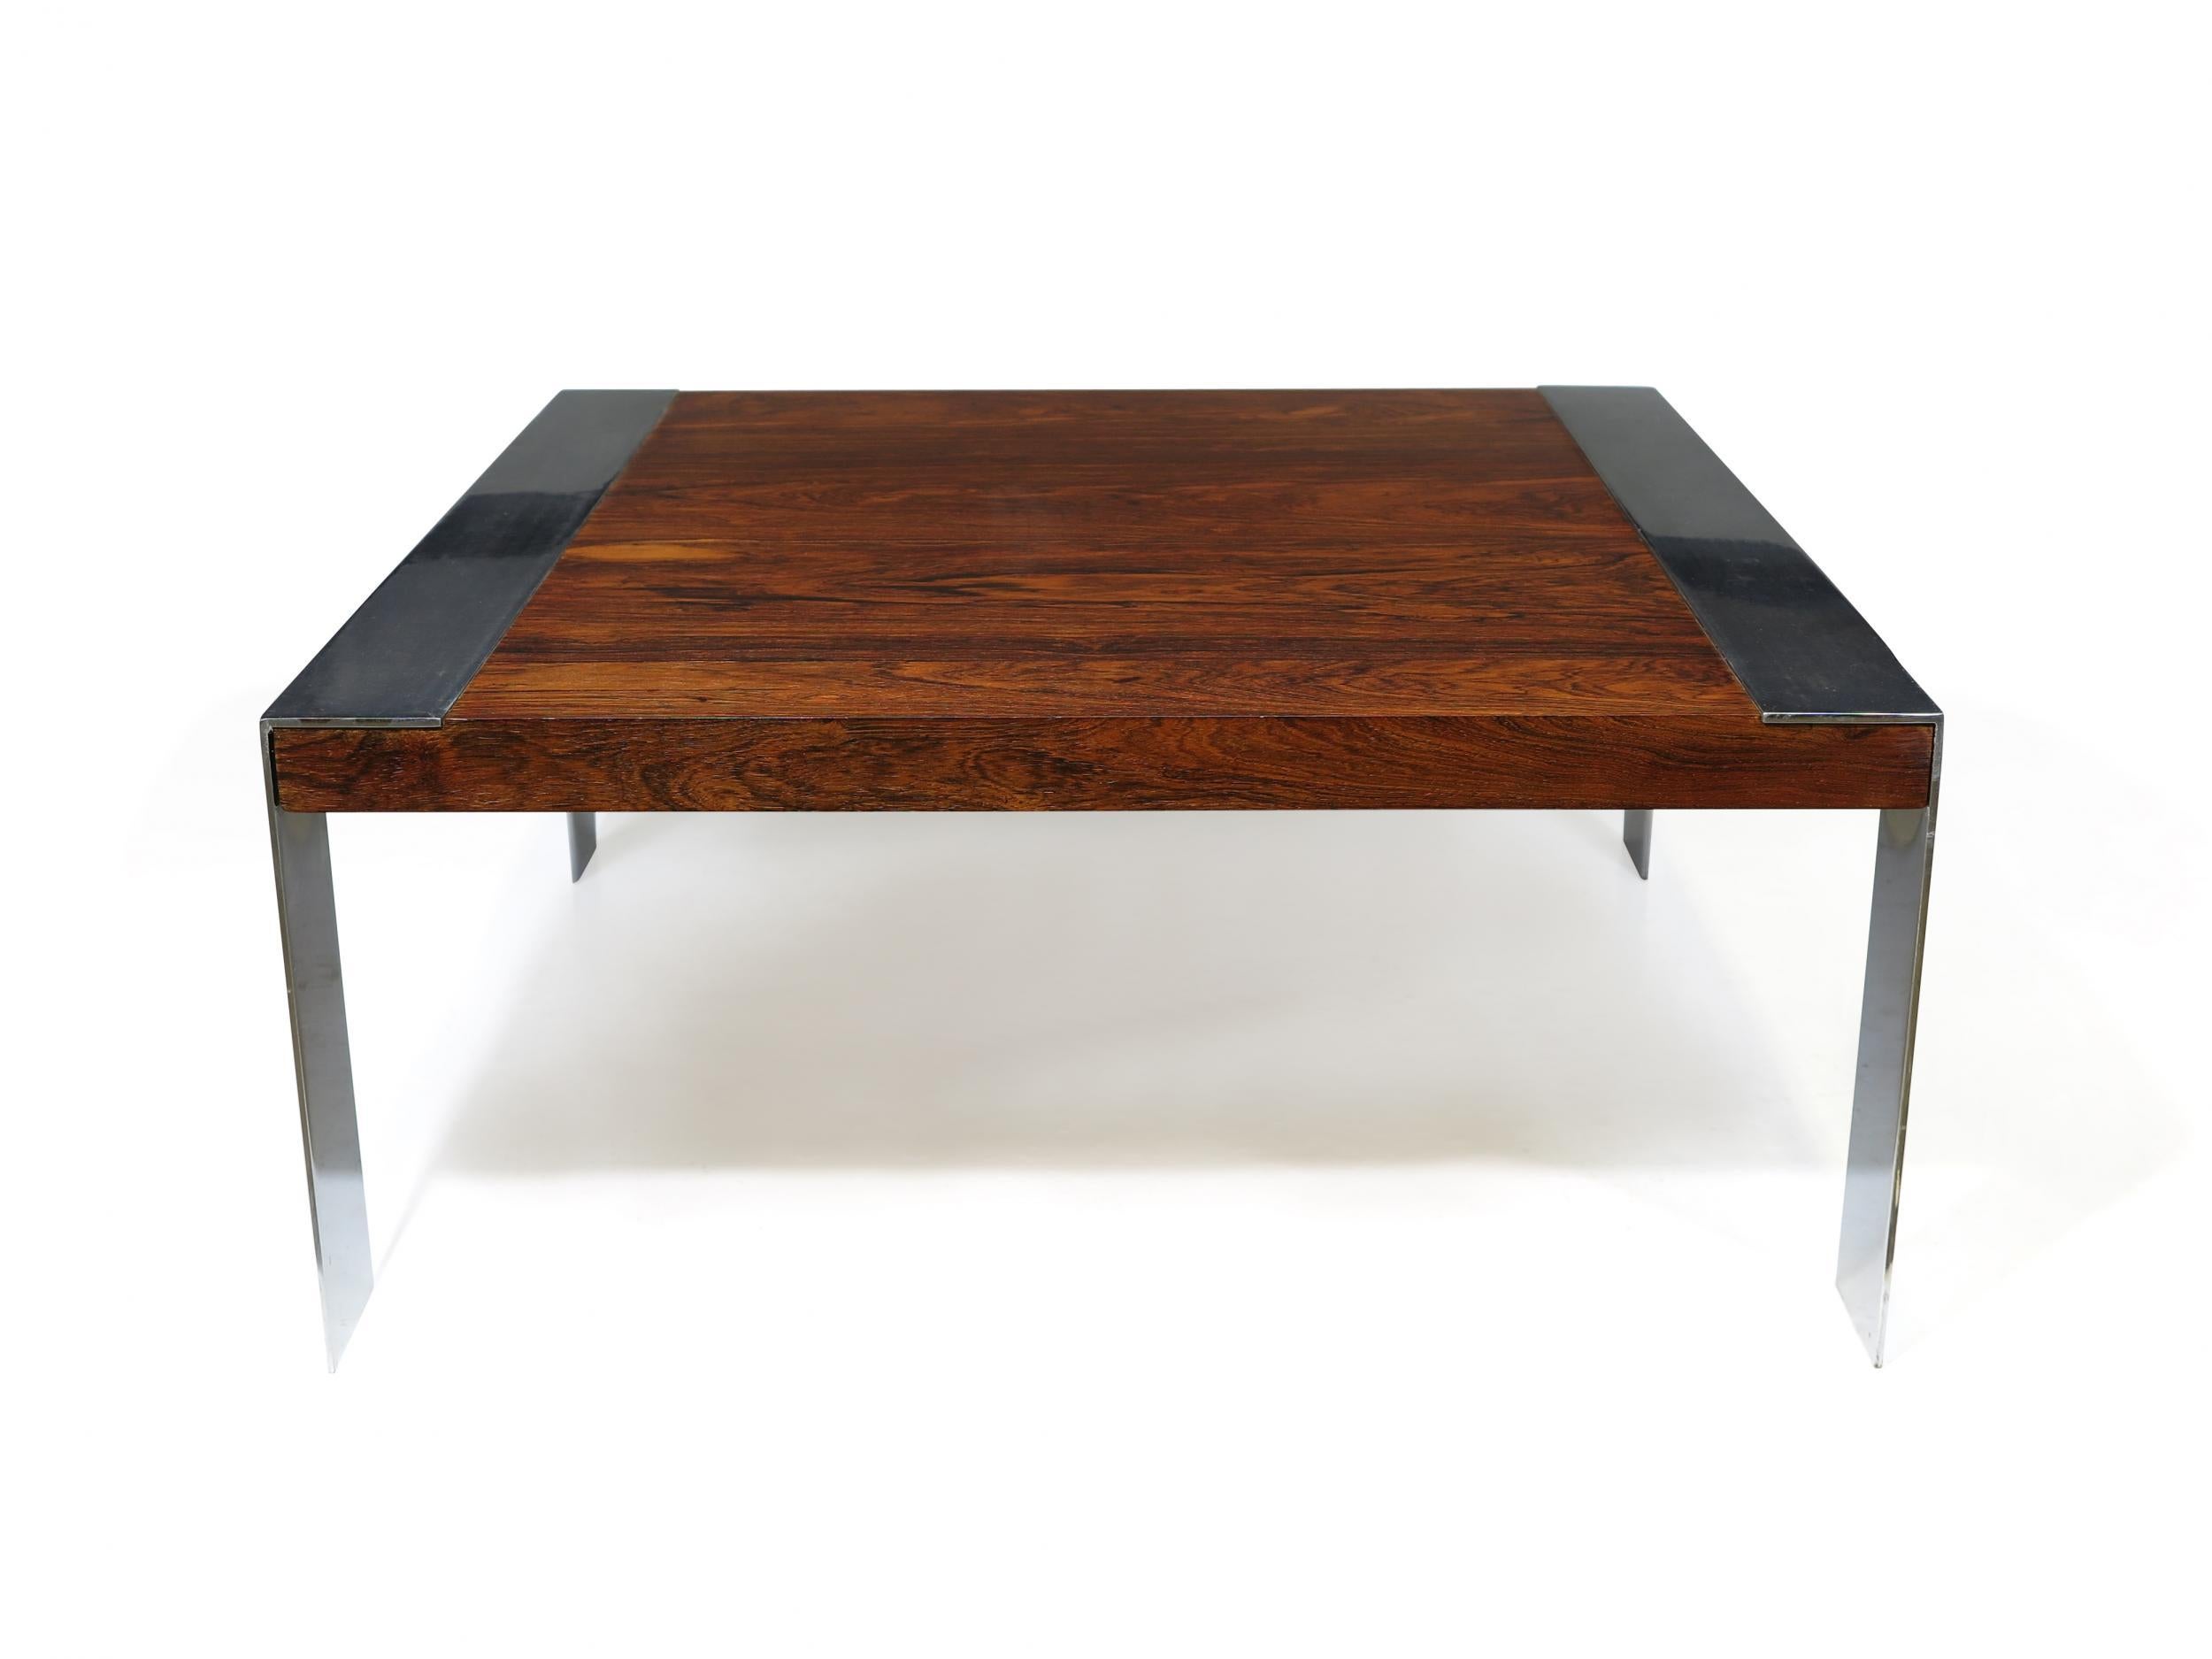 Midcentury rosewood coffee table with book-matched rosewood on heavy chrome legs. Chrome shows light wear and can be re-chromed upon request.